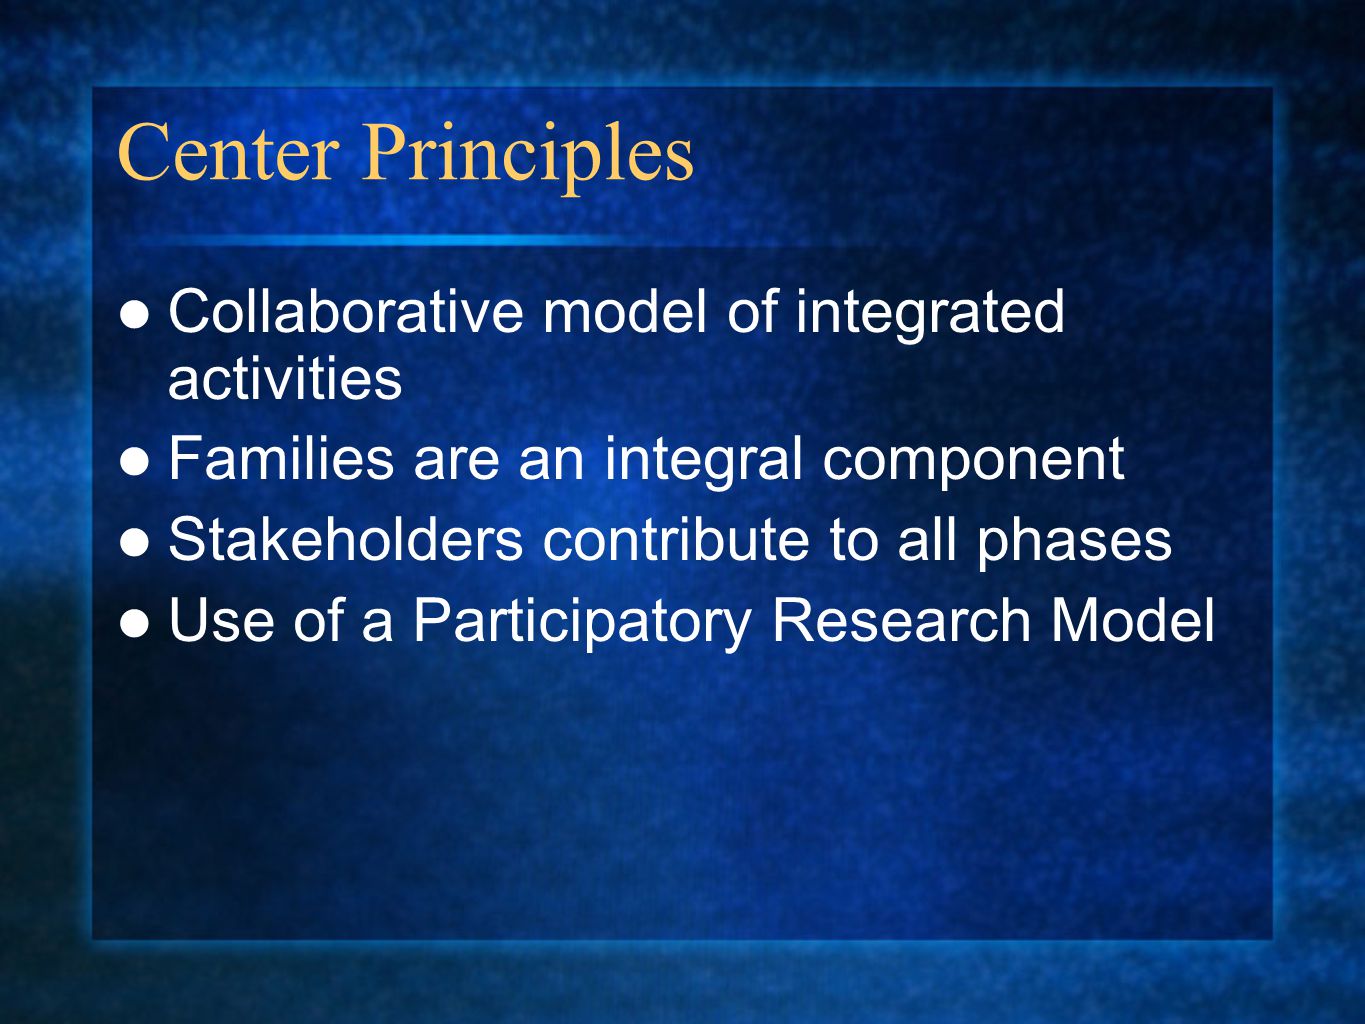 Center Principles Collaborative model of integrated activities Families are an integral component Stakeholders contribute to all phases Use of a Participatory Research Model